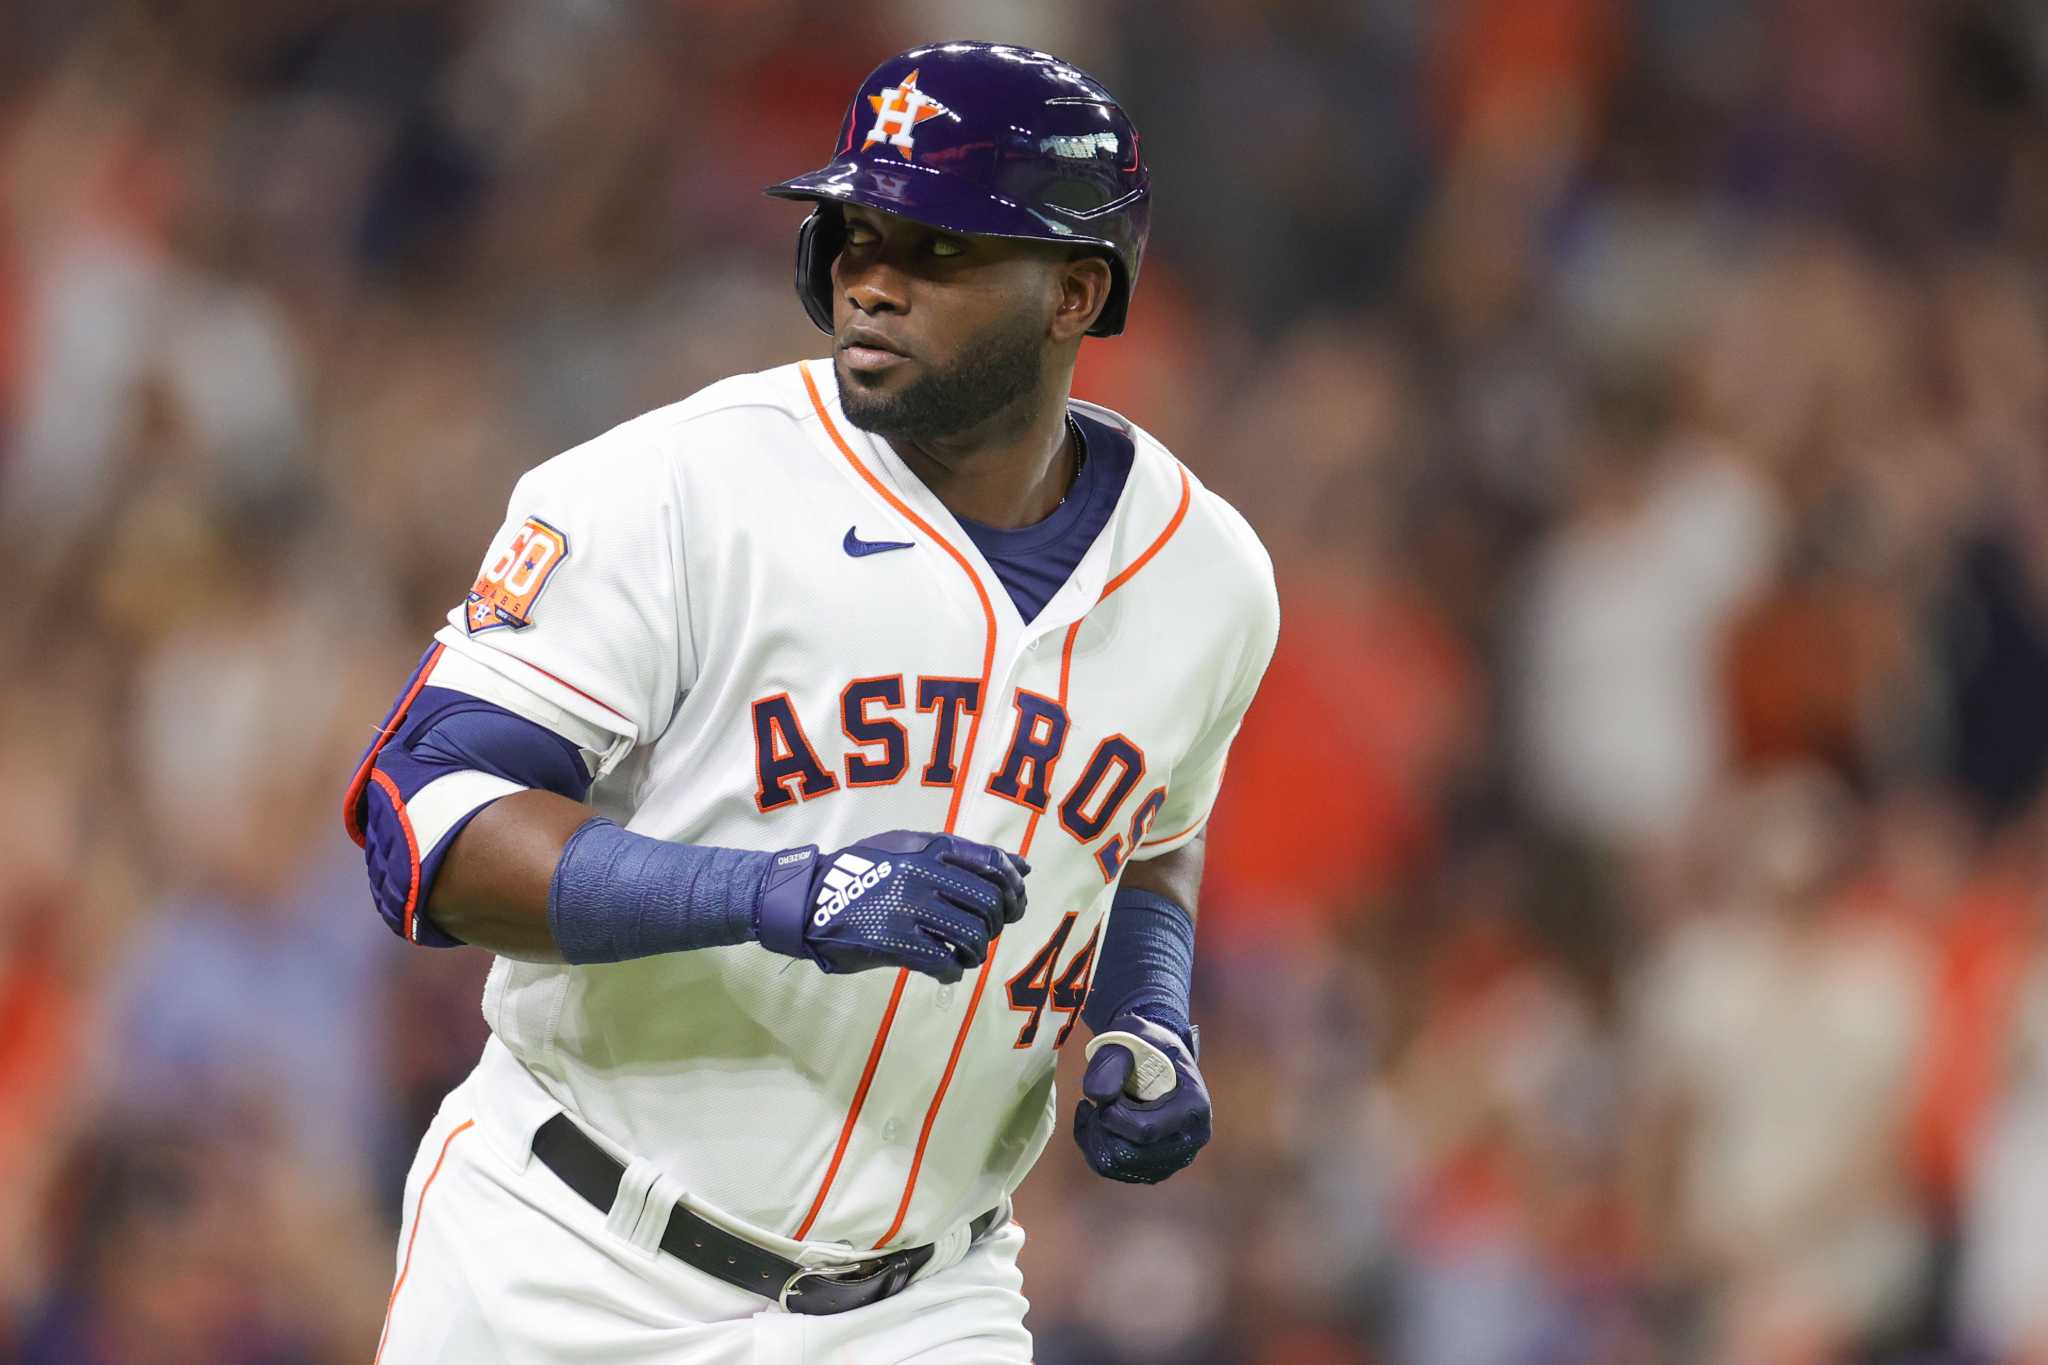 How Yordan Alvarez's home run barrage compares to others in Astros history